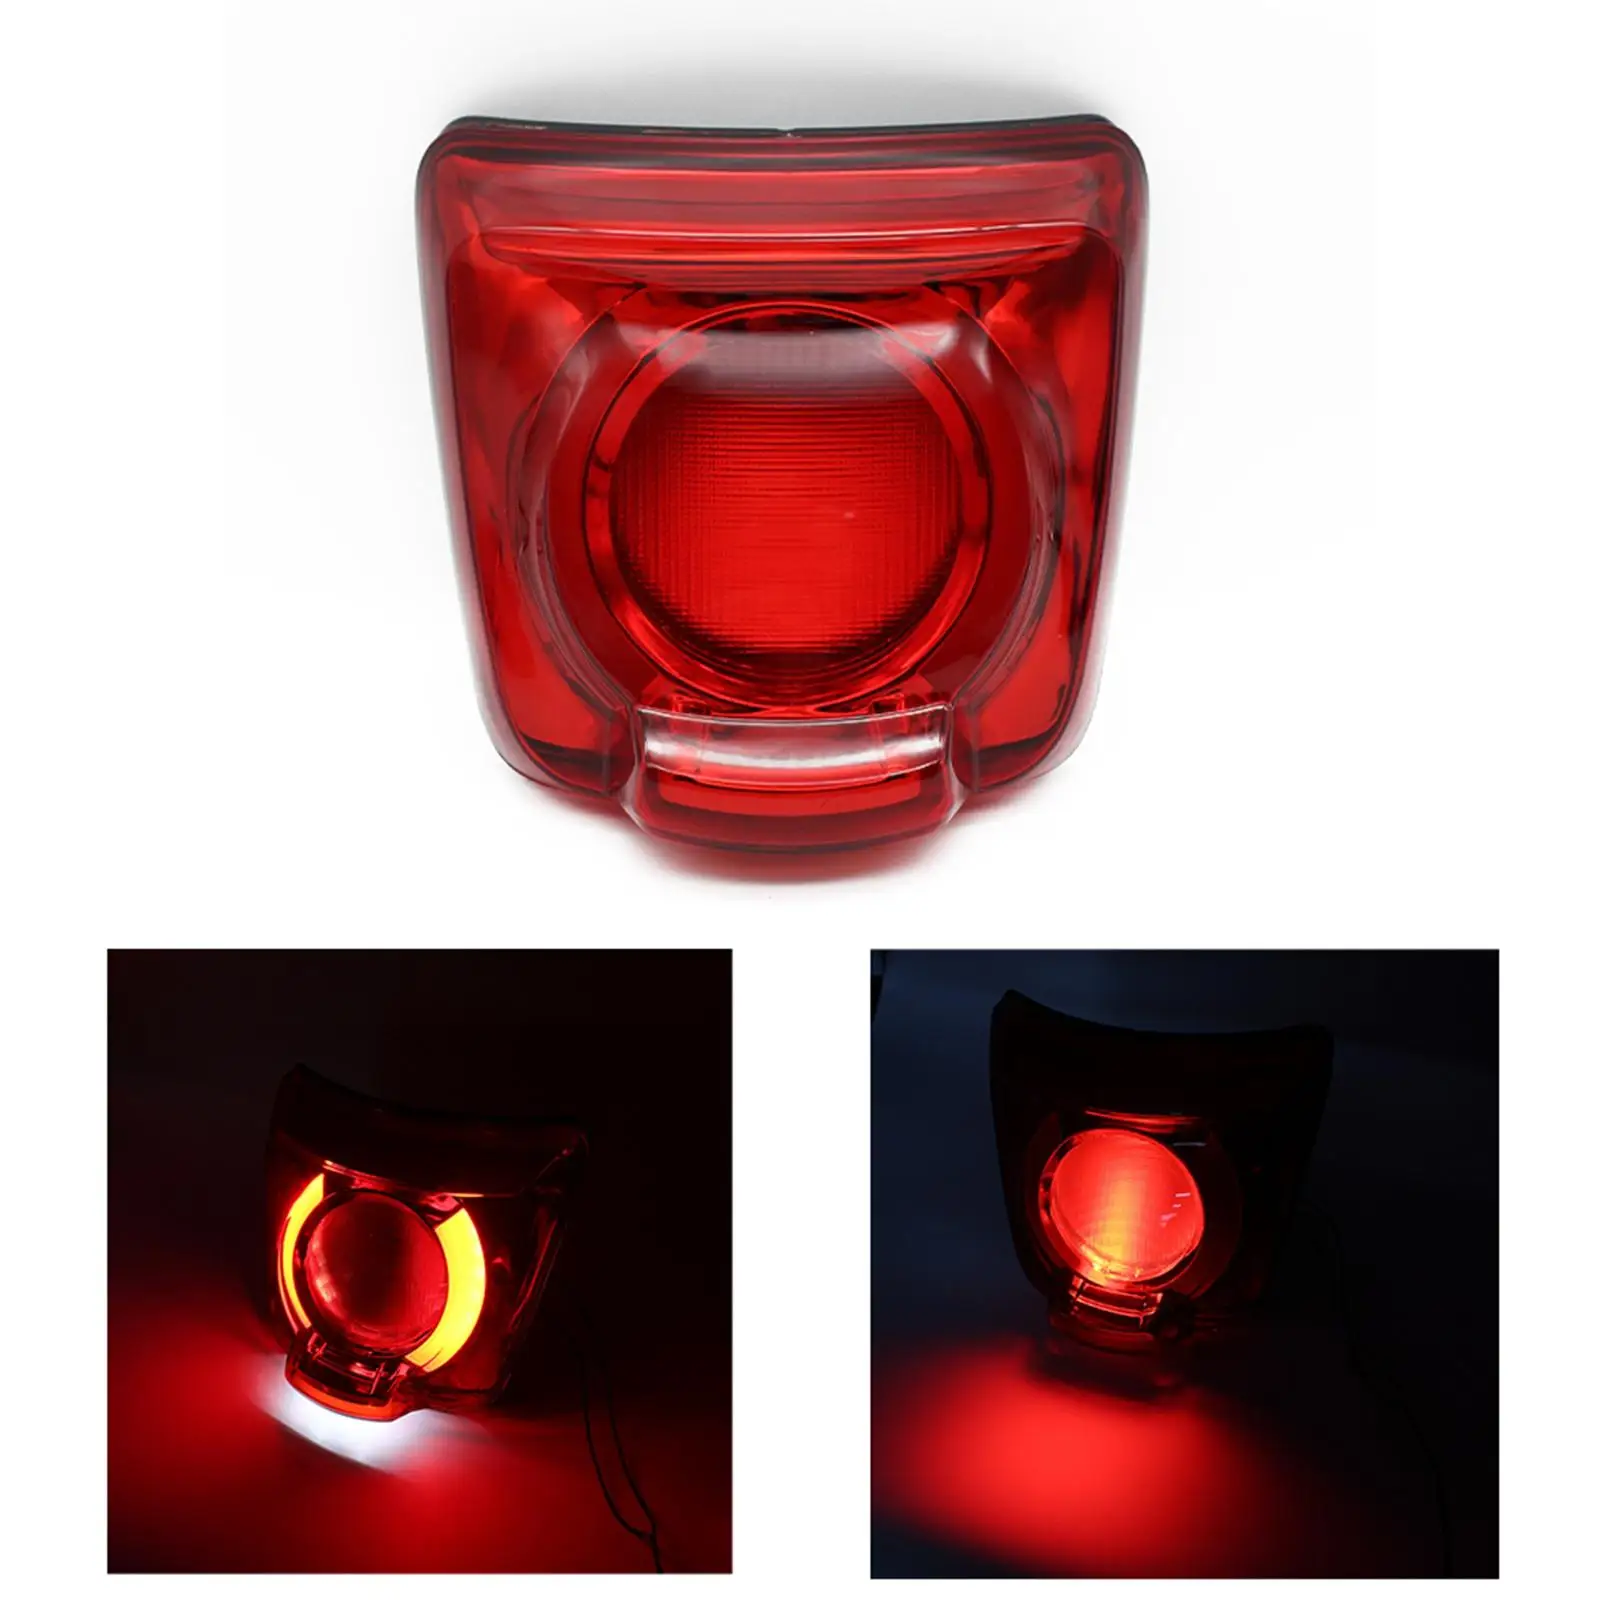 

LED Assembly Rear Lamp for 300 GTS 300 provide maximum visibility